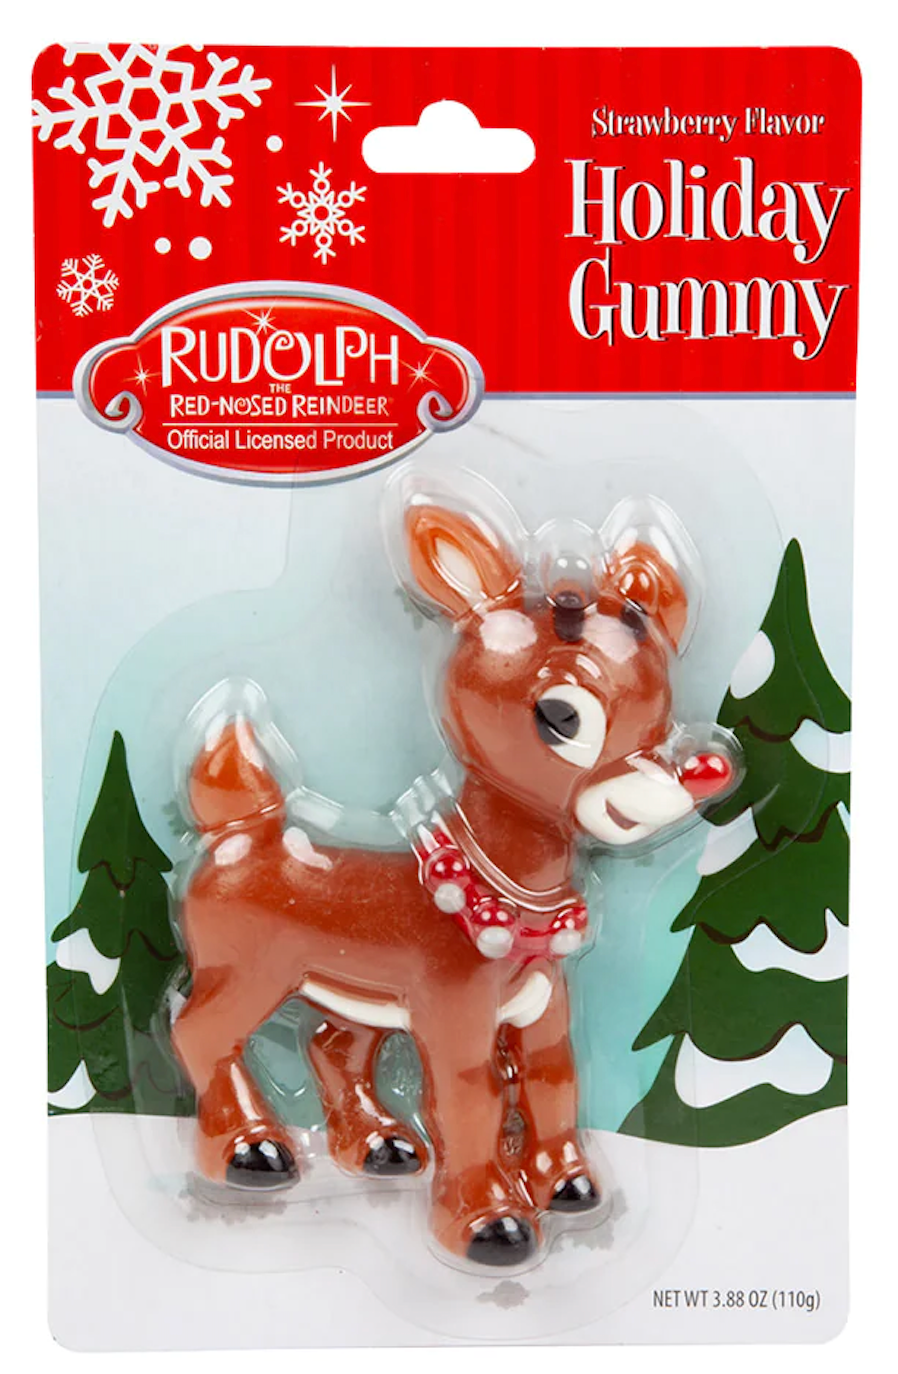 Holiday Gummy - Rudolph the Red-Nosed Reindeer